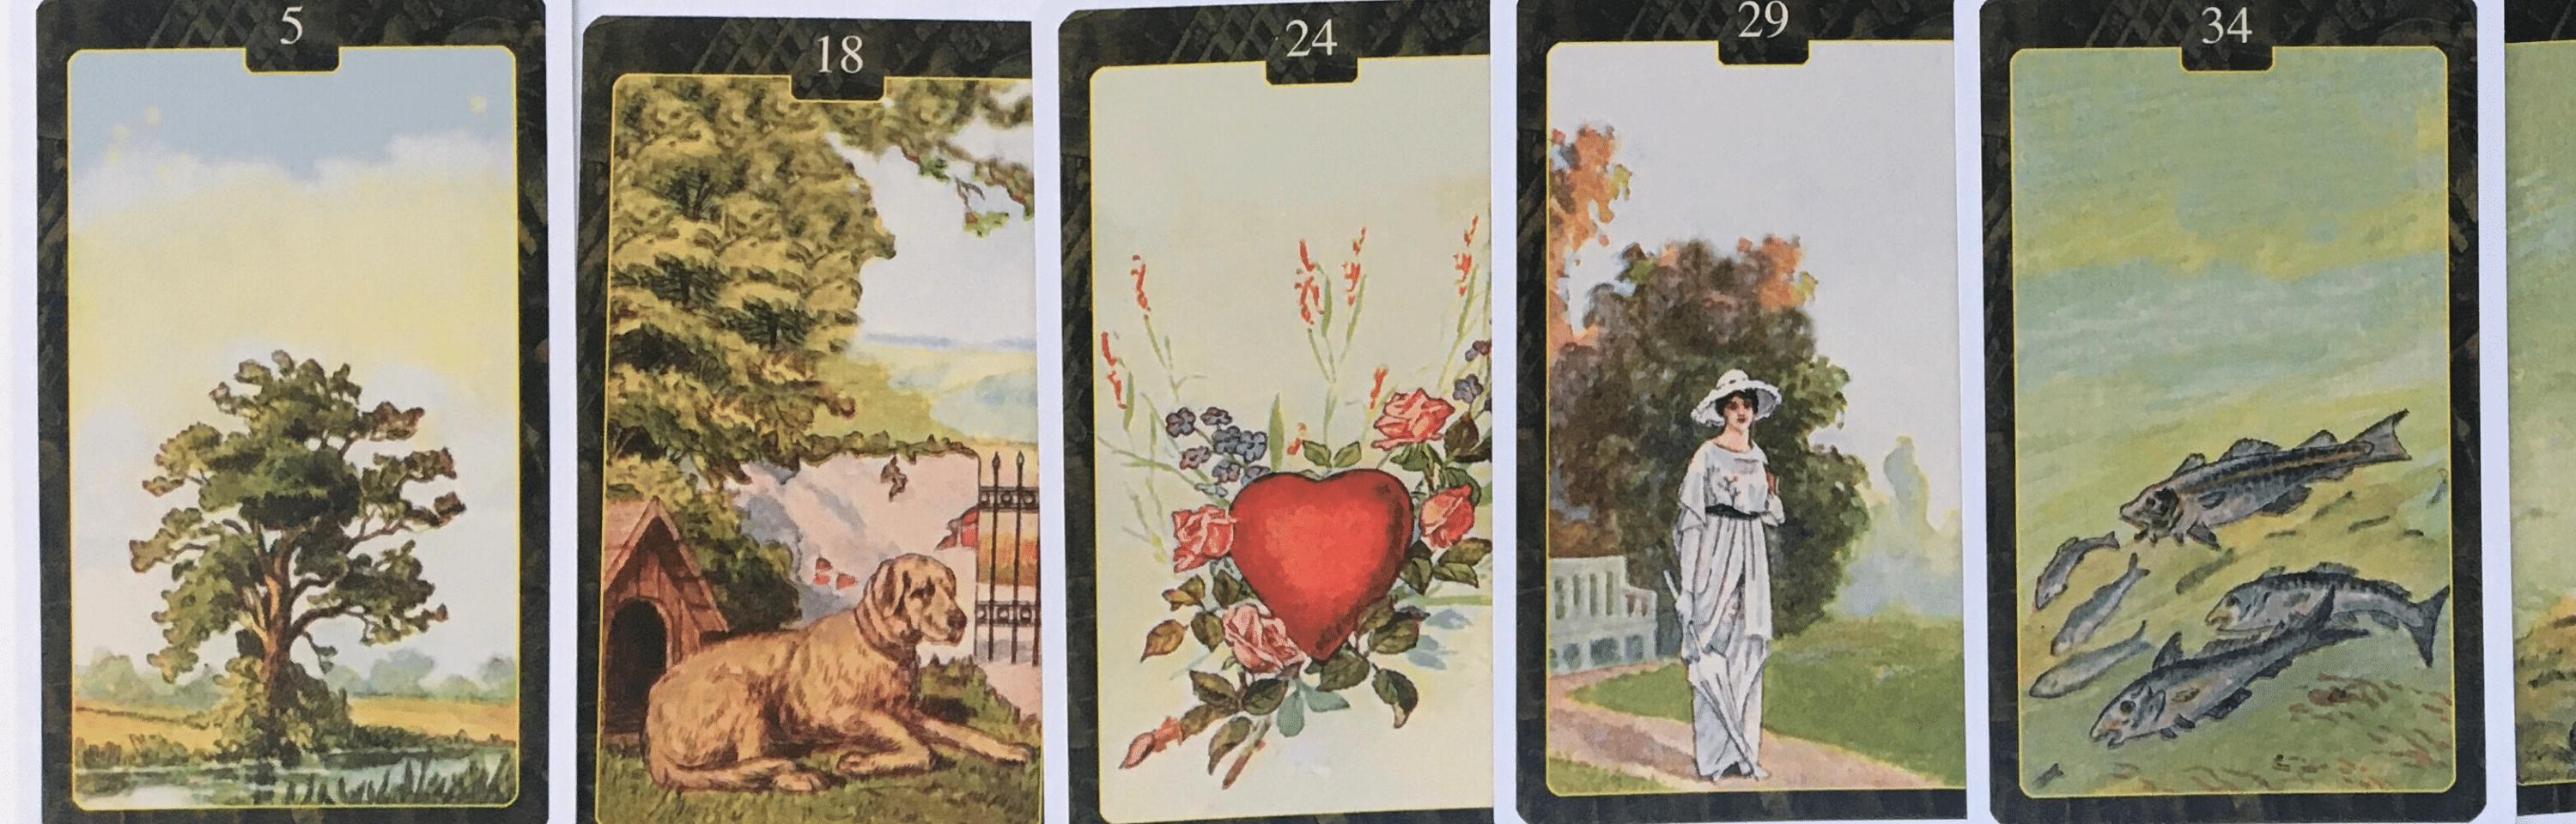 A selection of Lo Scarabeo's Lenormand Oracle Cards